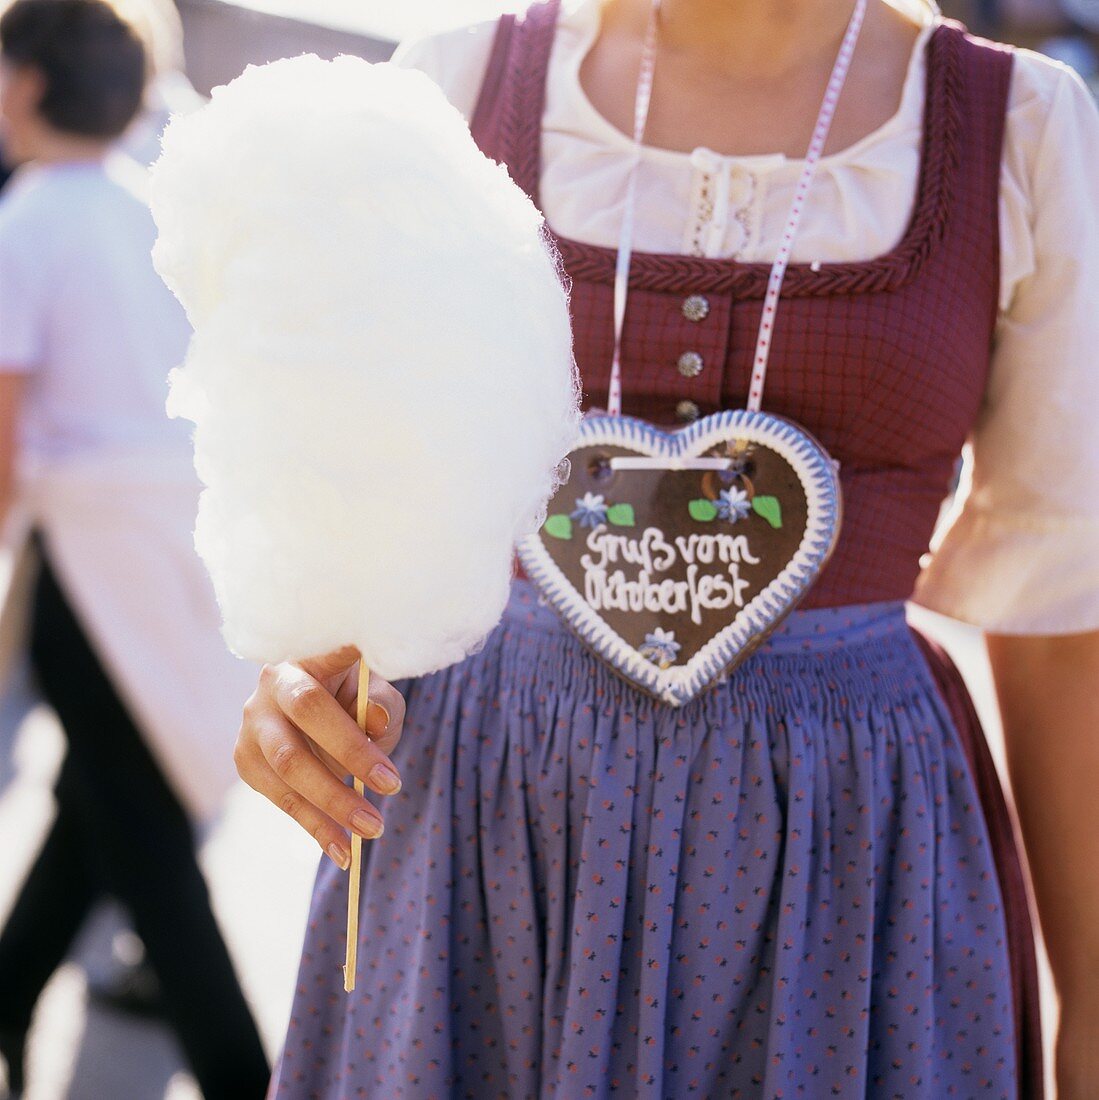 Woman with candyfloss & gingerbread heart at October Fest